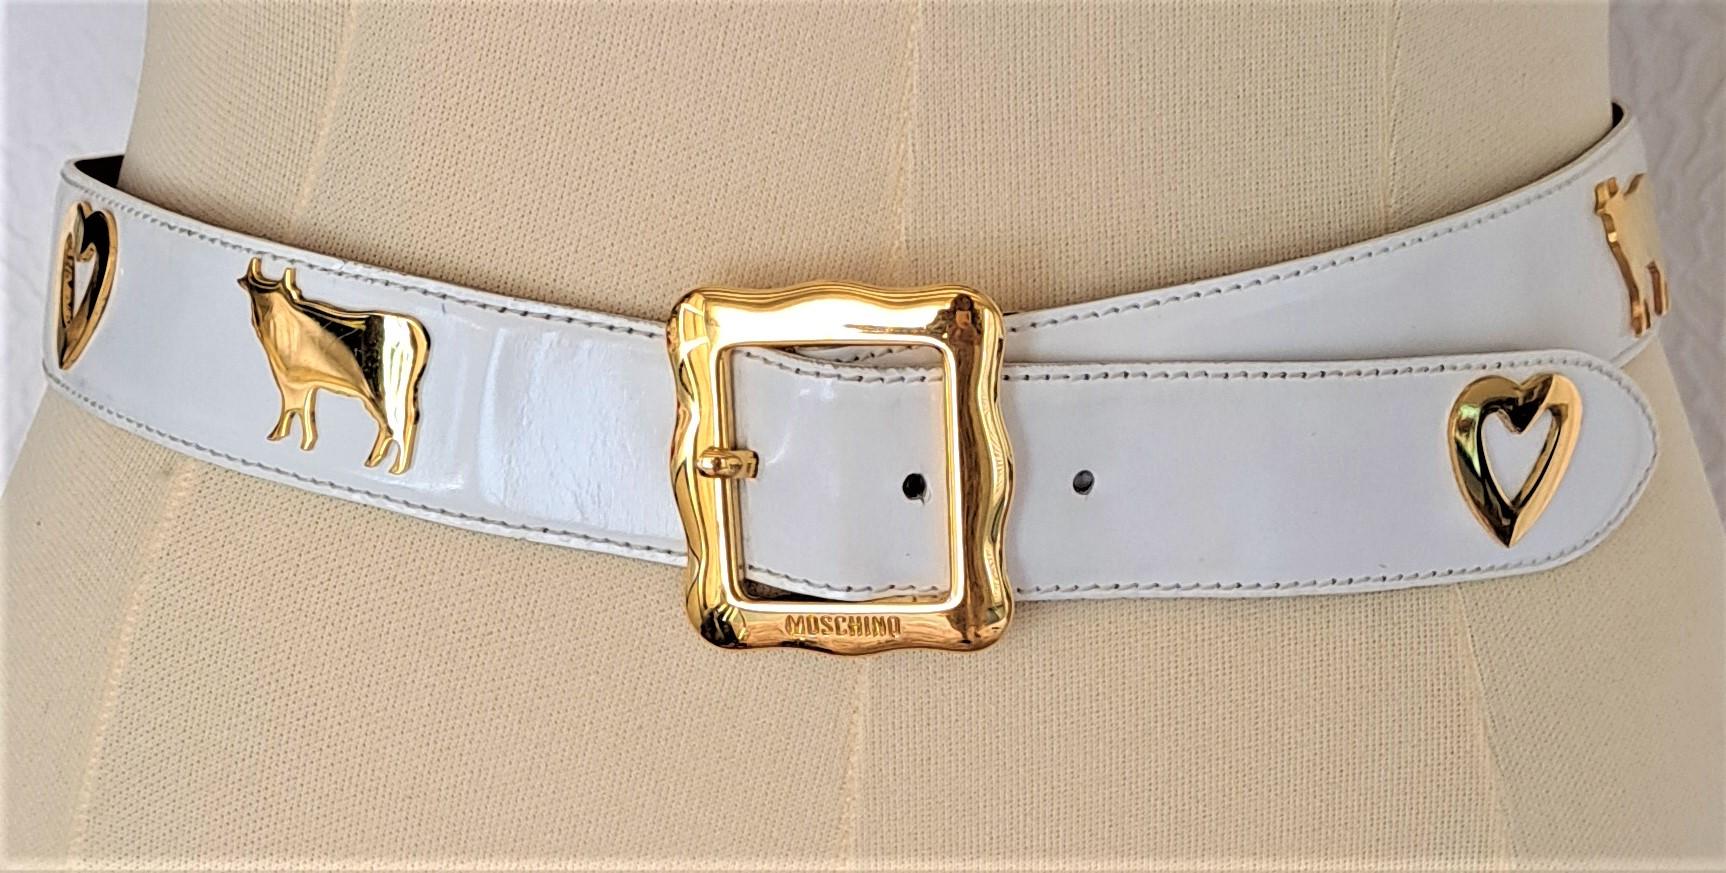 This beautiful Vintage Moschino by Redwall 1987 belt (they do not produce these anymore, so it is a collectors item) is a fashion accessory created by the Italian luxury fashion brand Moschino. Moschino is known for its bold and eccentric designs,